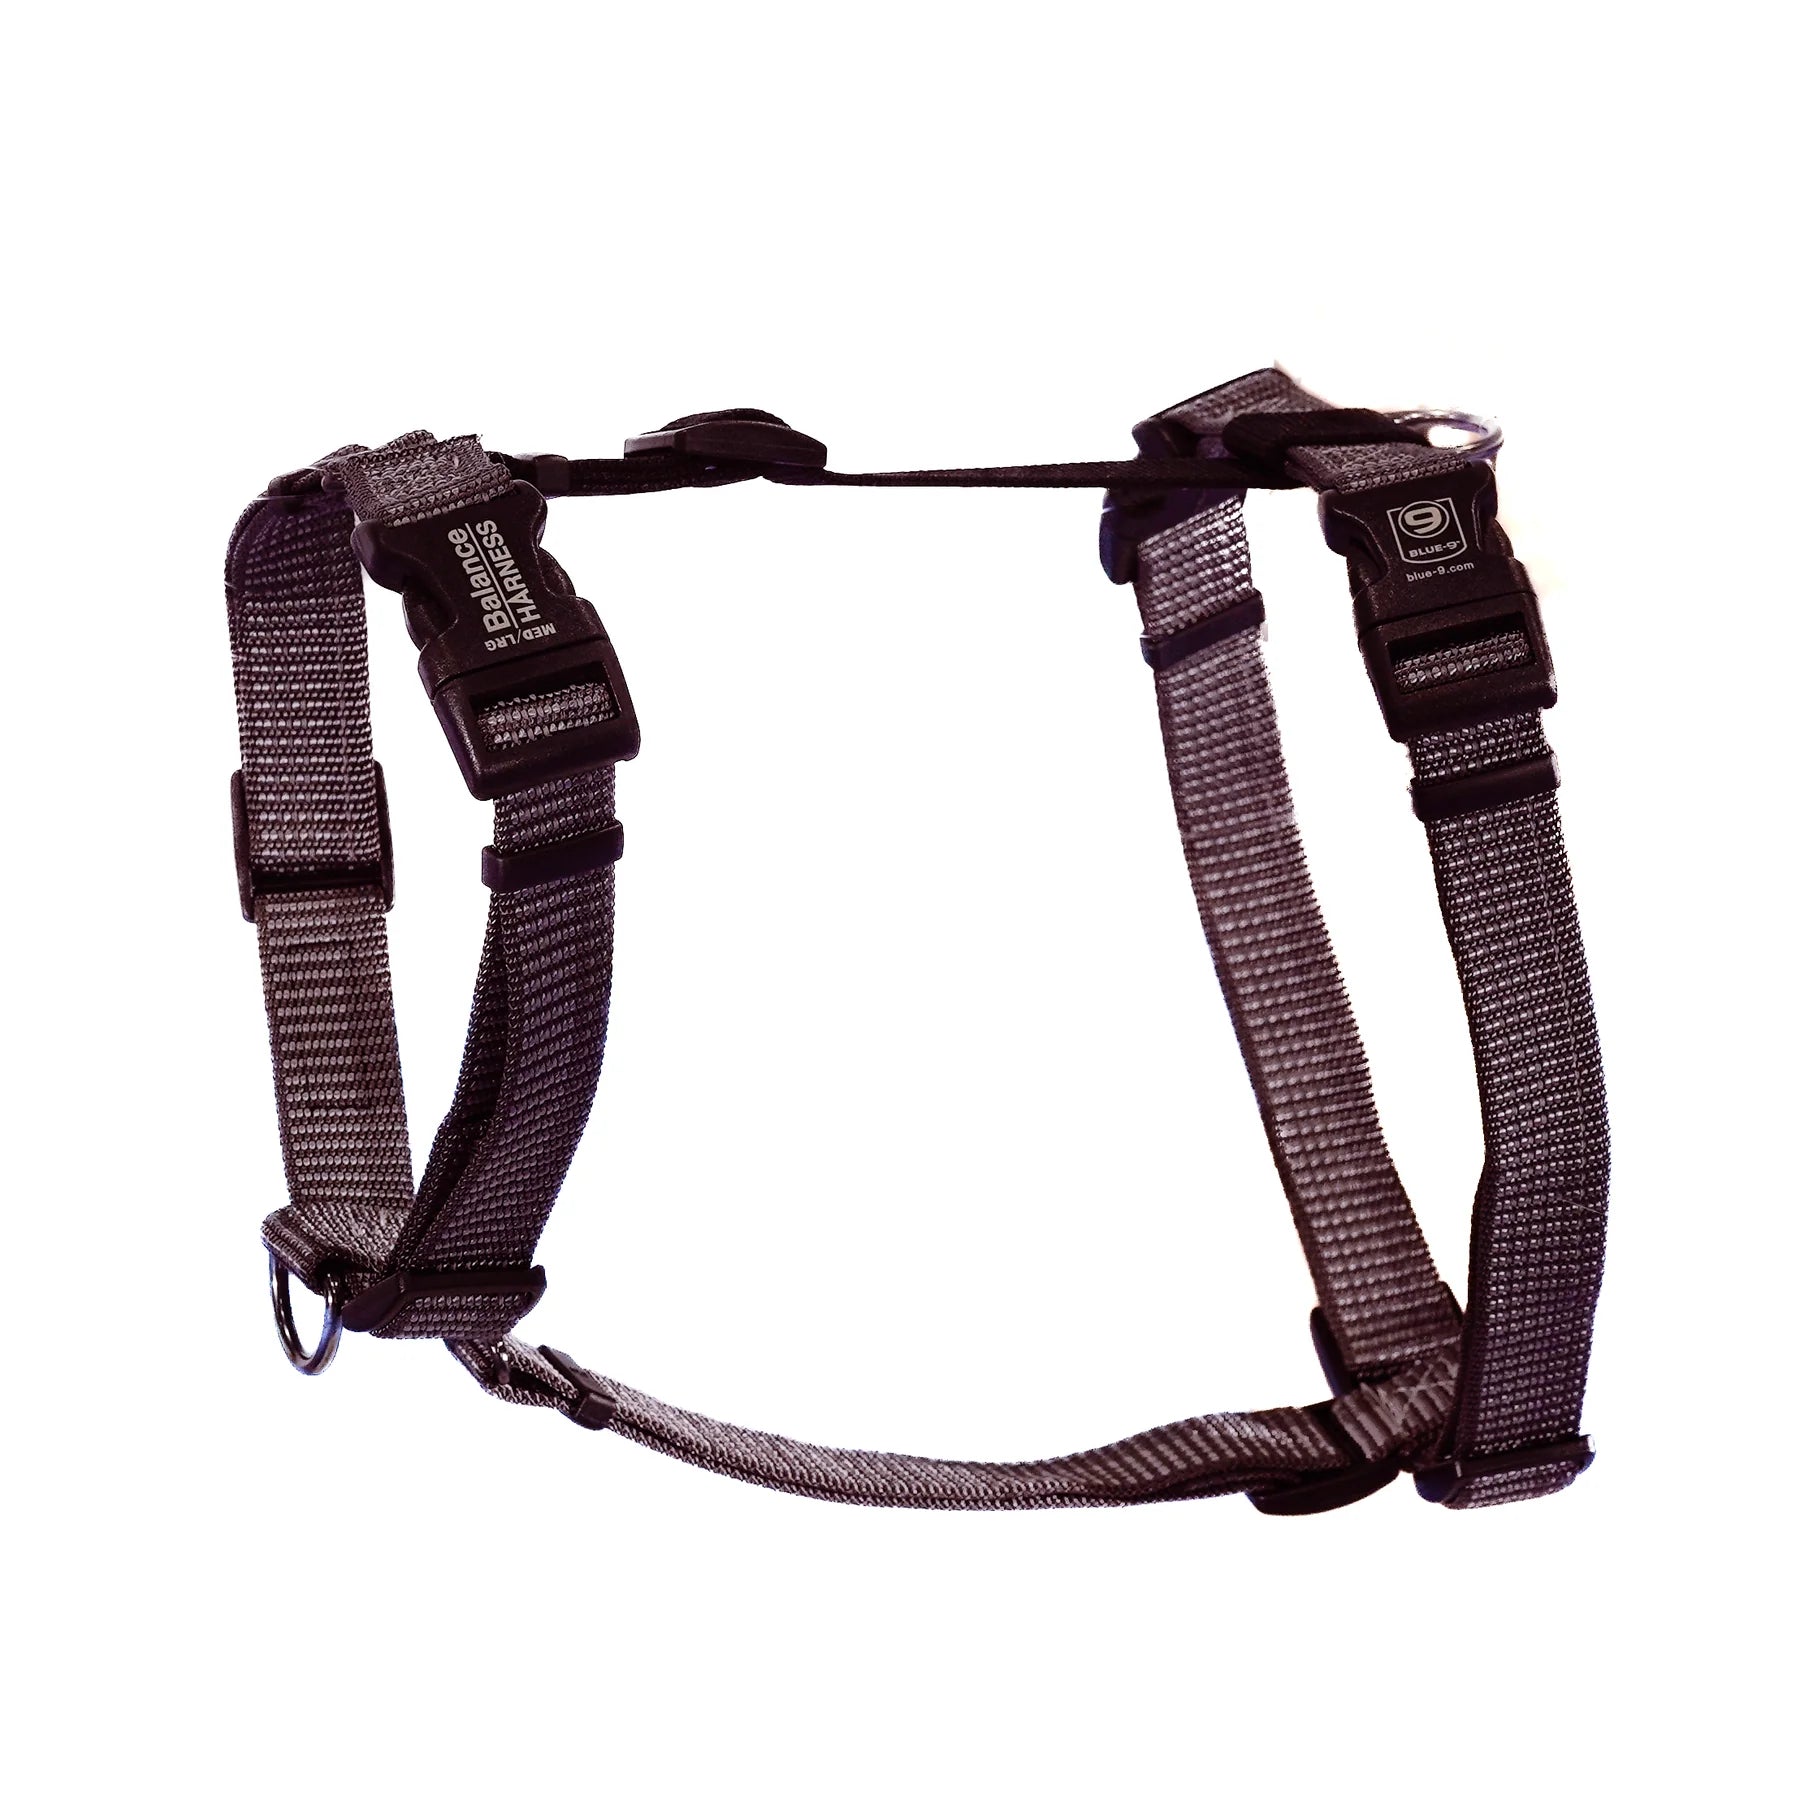 A Blue-9: REFLECTIVE Balance Harness with leash attachment on a white background. (Brand Name: Your Whole Dog)